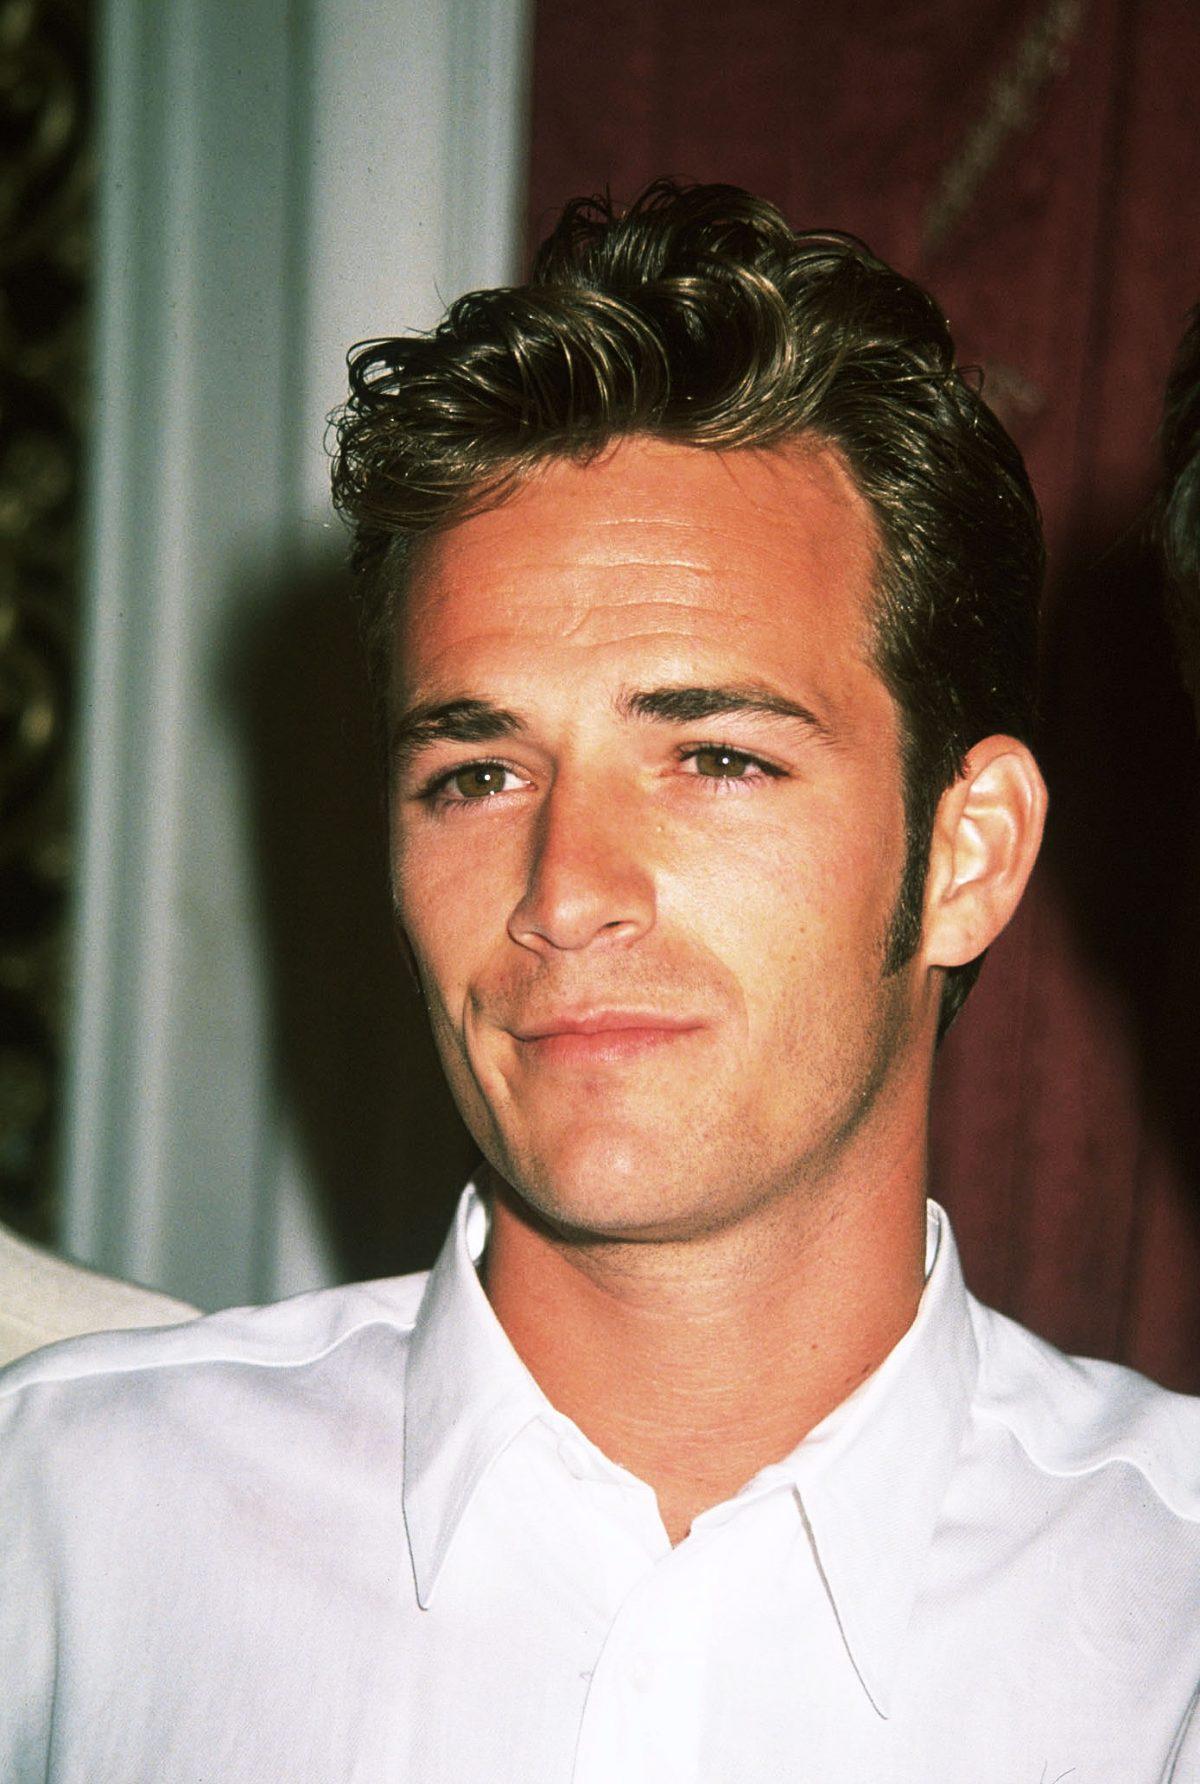 Undated file photo of Luke Perry. (photo by Newsmakers)